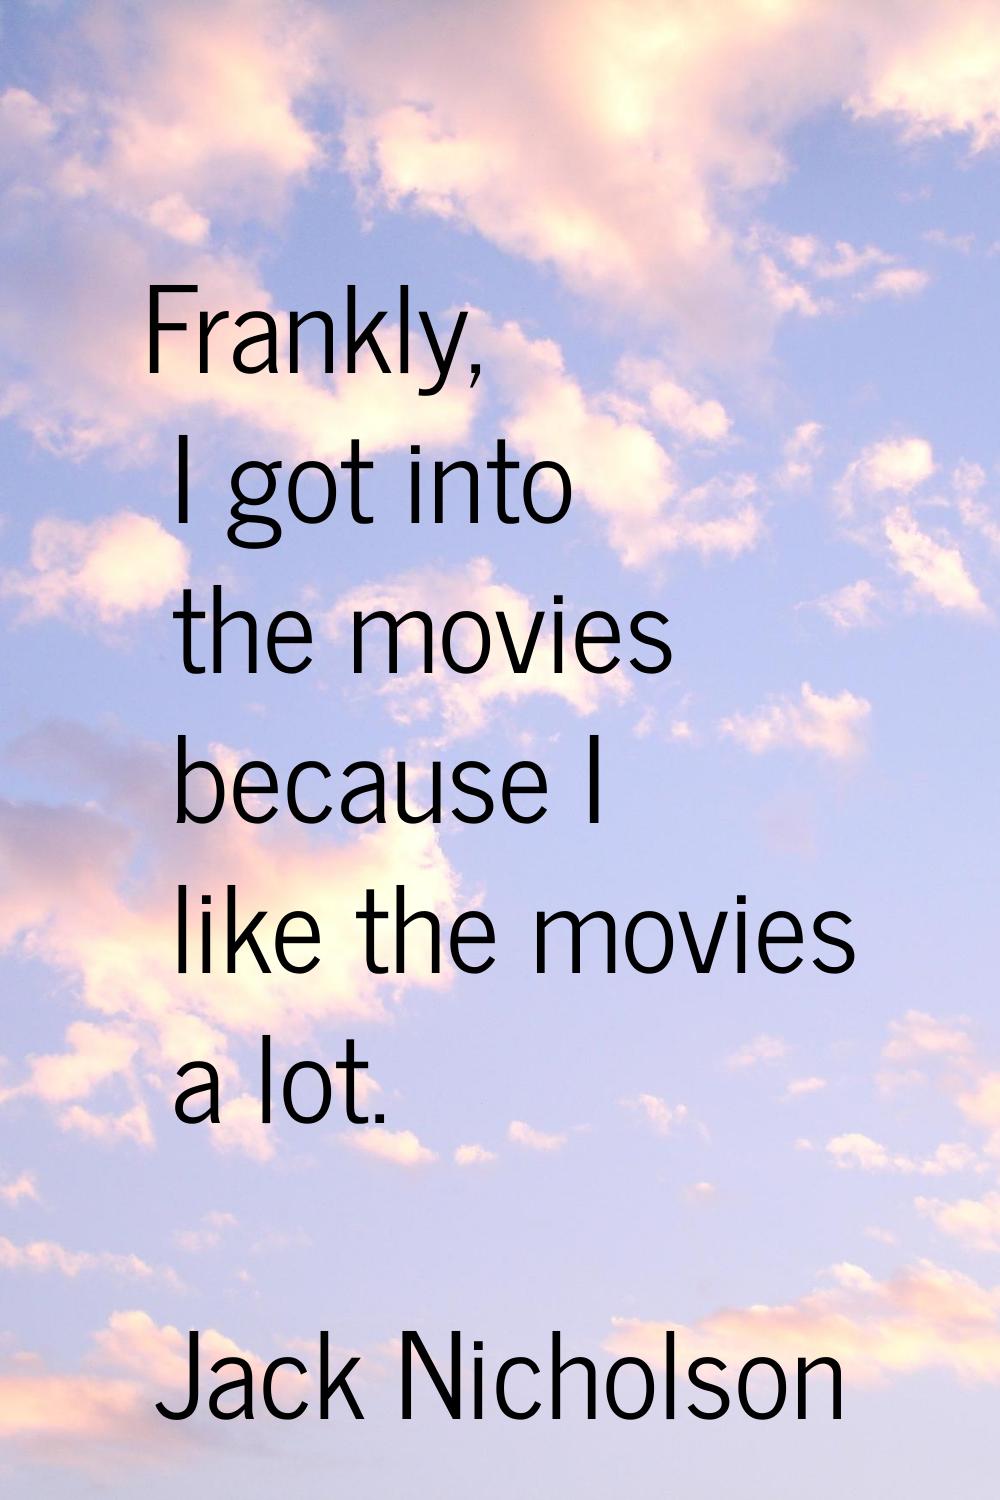 Frankly, I got into the movies because I like the movies a lot.